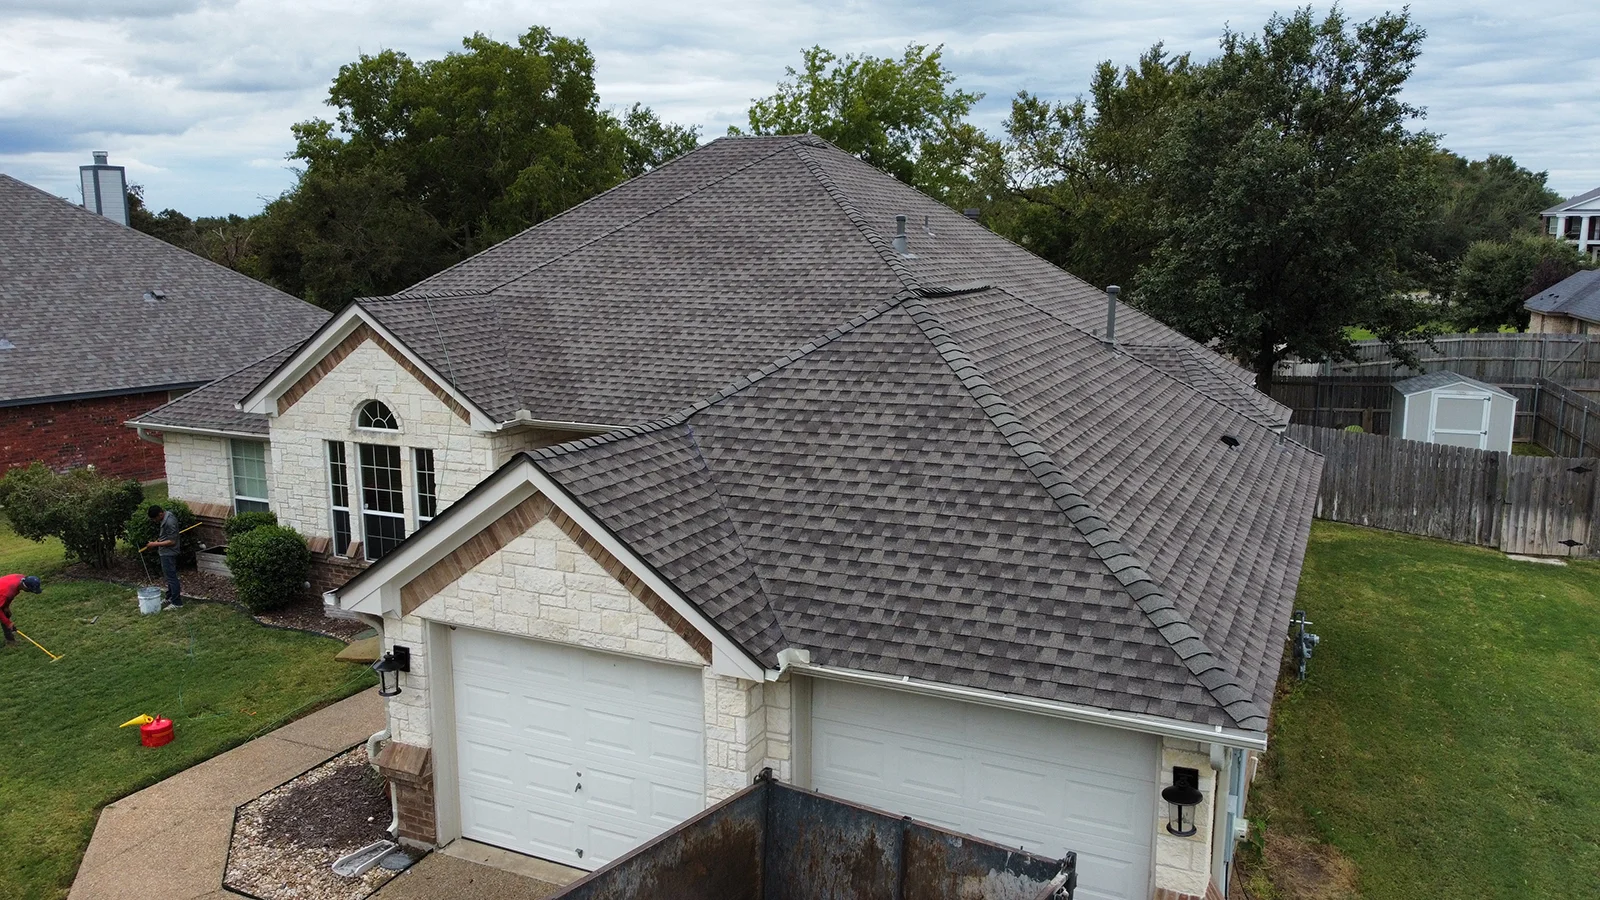 Roof Repair and roof installation by Roam Roof in Killeen Texas.